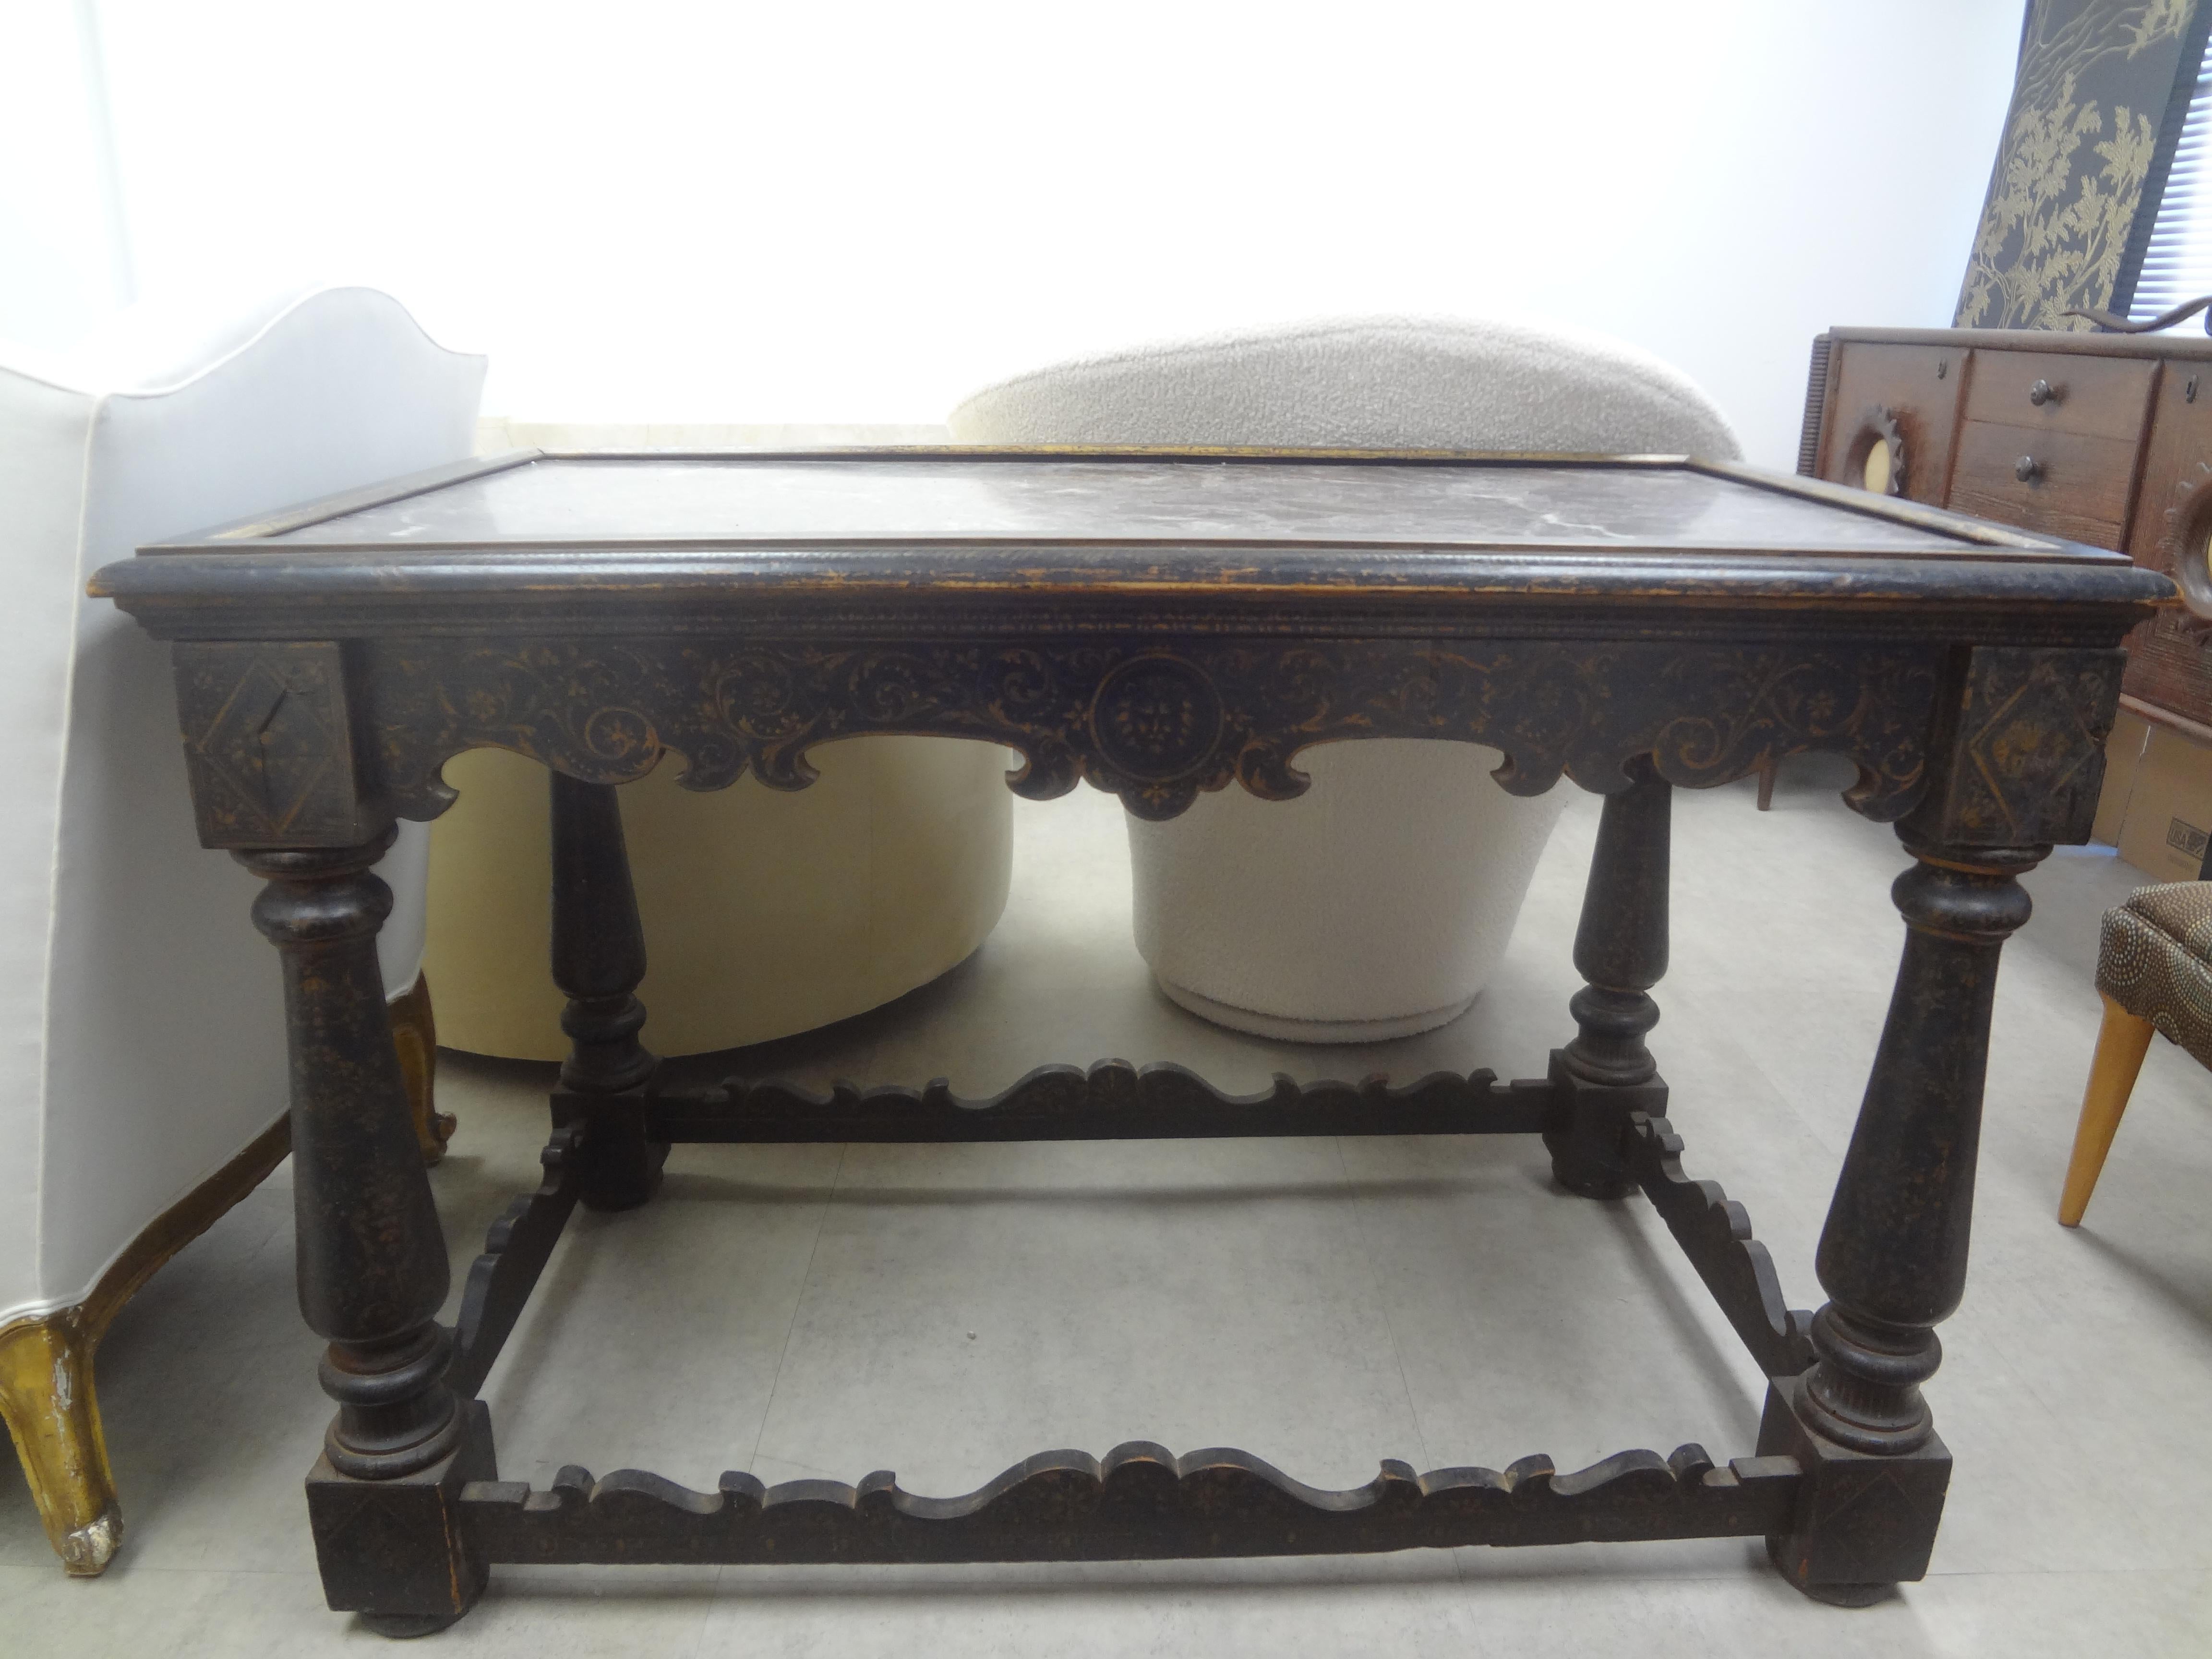 18th Century Italian Louis XIV Ebonized Table.
Our handsome rectangular period 18th century Tuscan ebonized fruitwood table, side table or center table has turned legs, a beautifully carved hand decorated apron and stretcher with an unusual framed